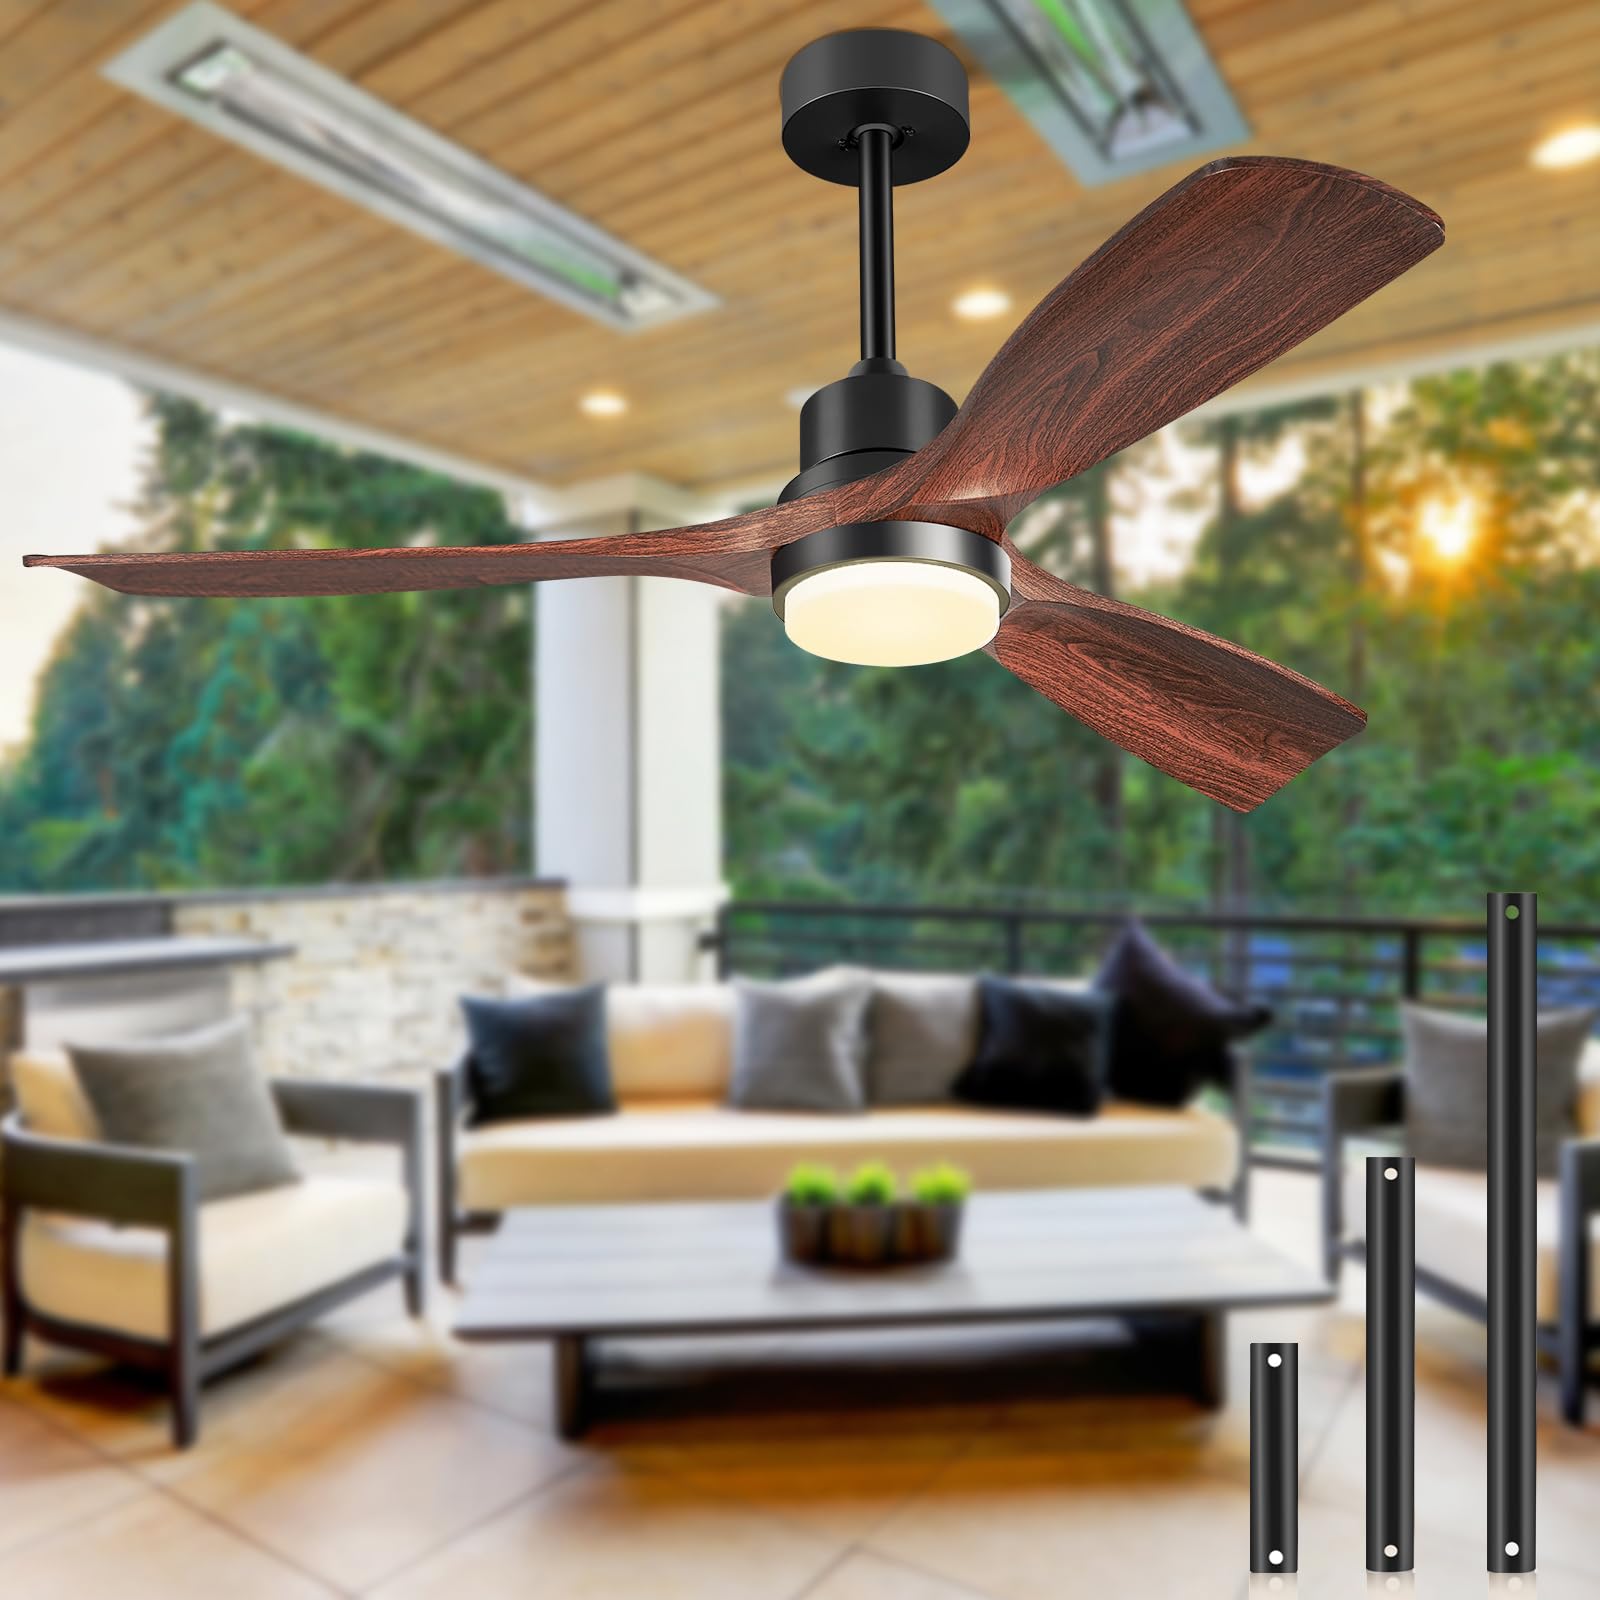 Forrovenco Ceiling Fans with Lights and Remote